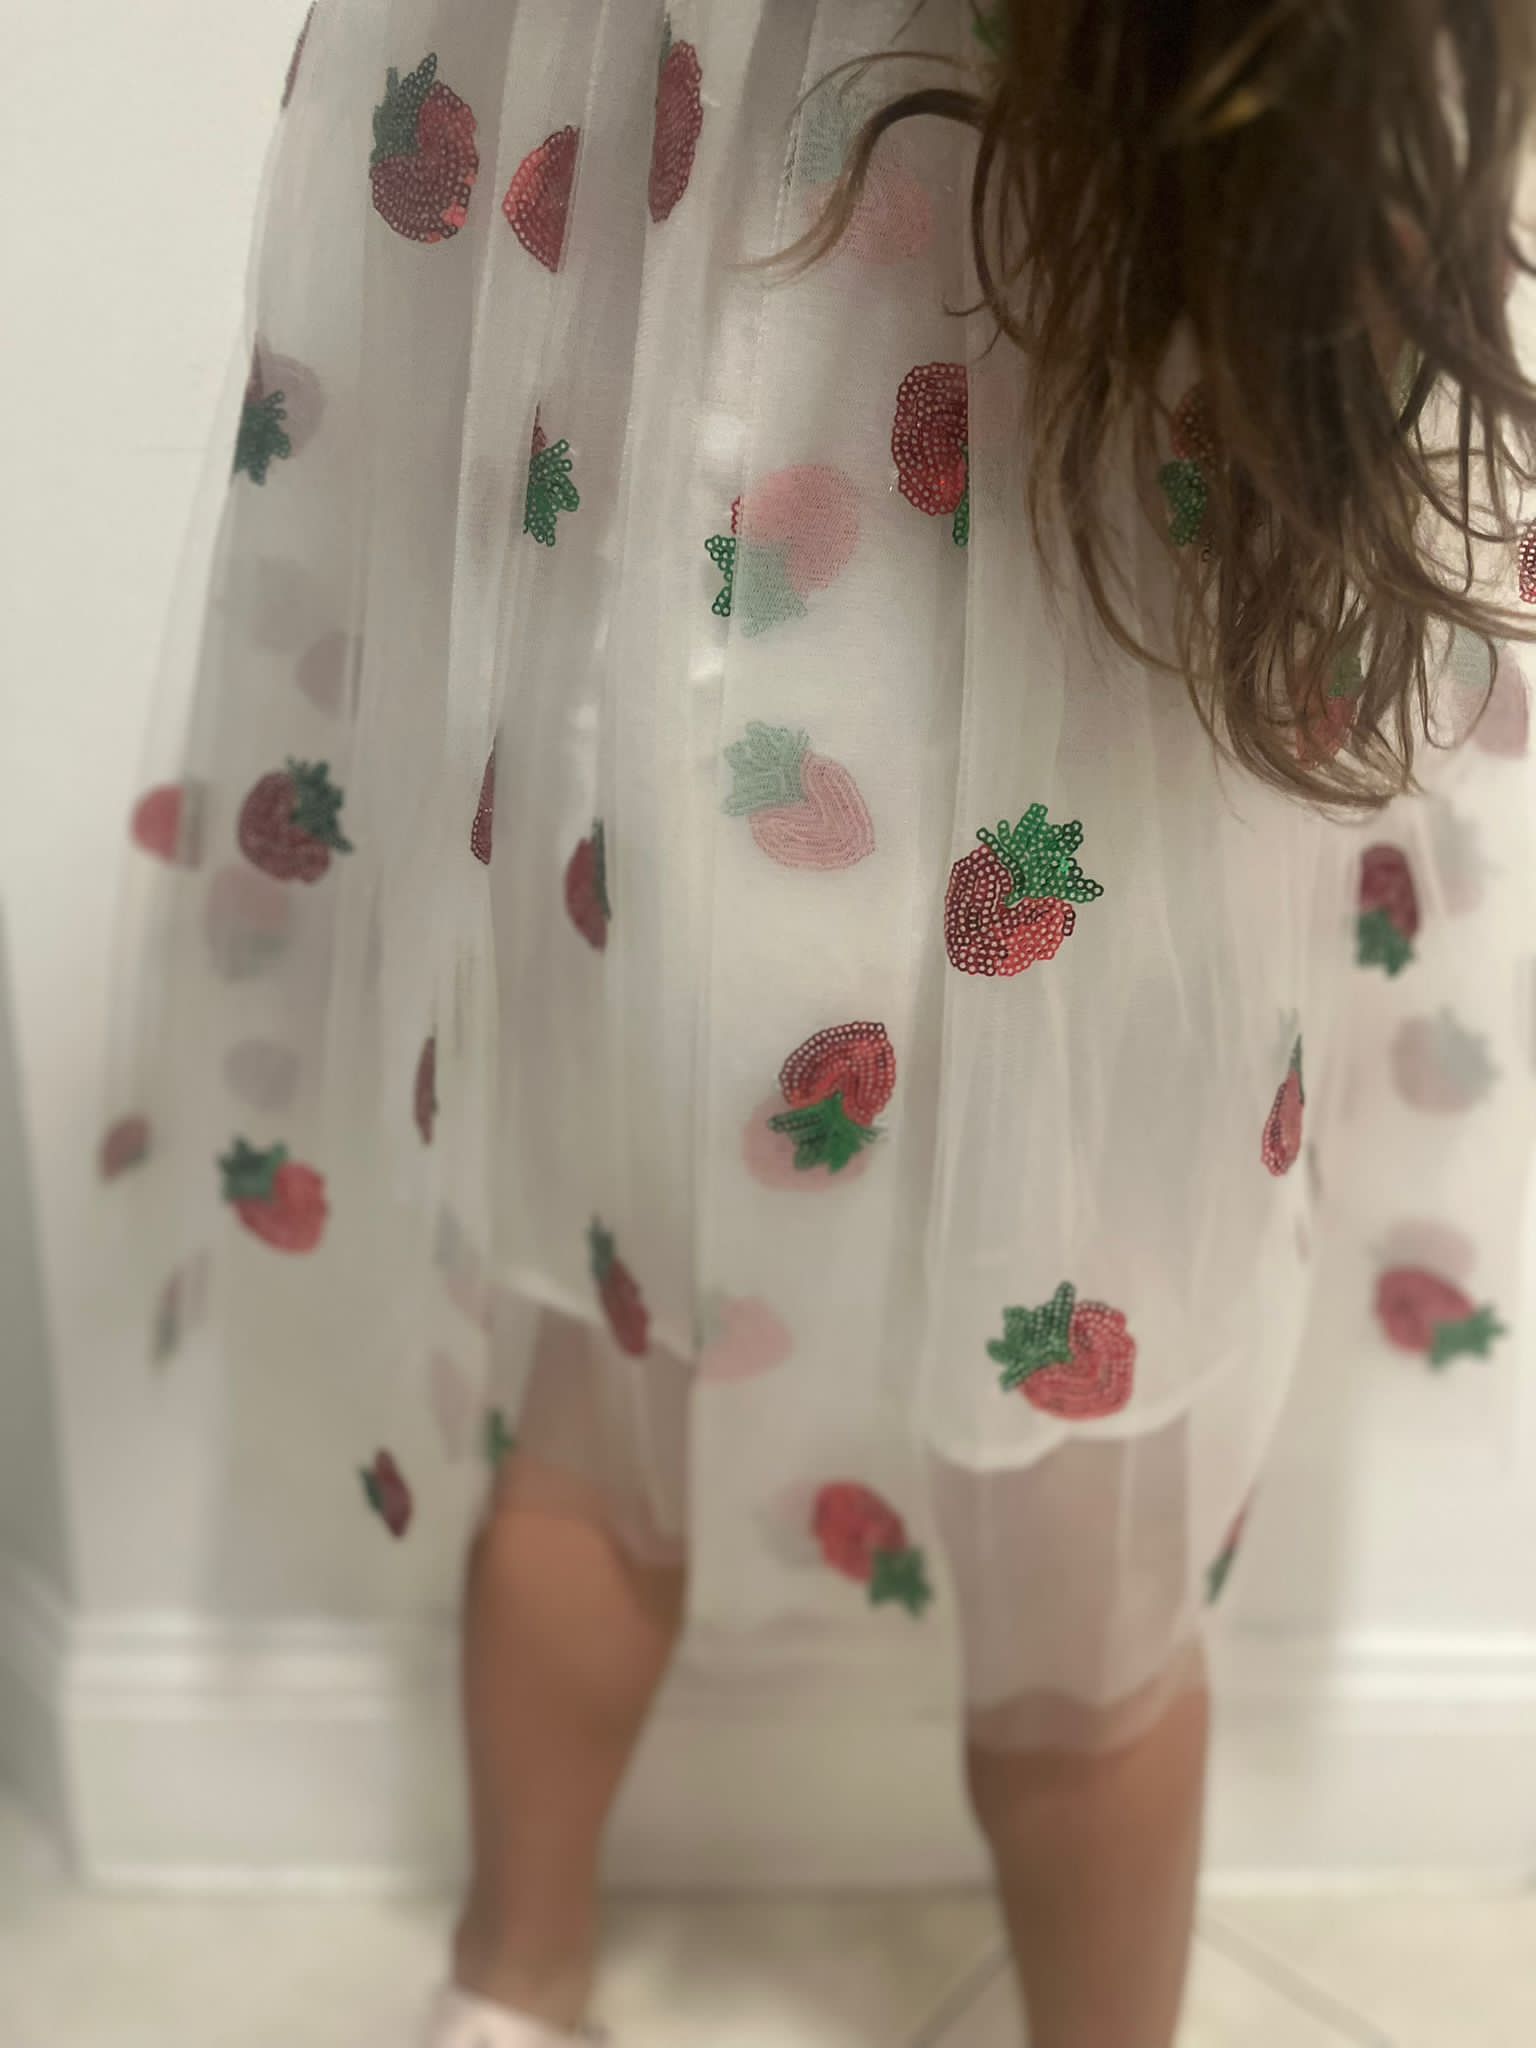 Strawberry Tulle Dress